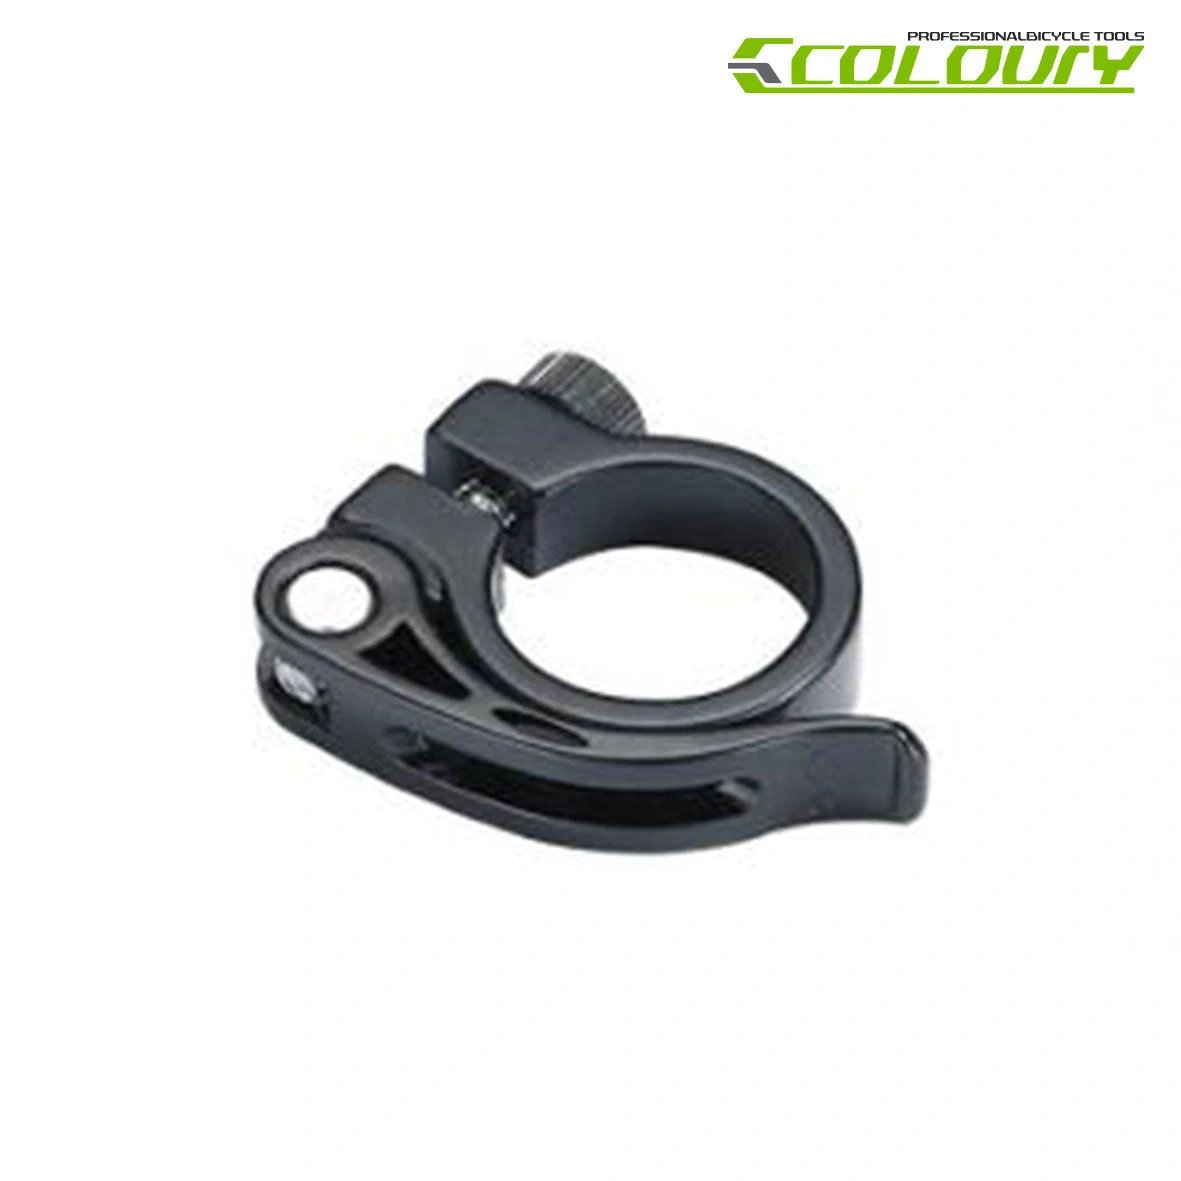 Coloury 31.8 Seatpost Clamp - Secure Seat Post Parts